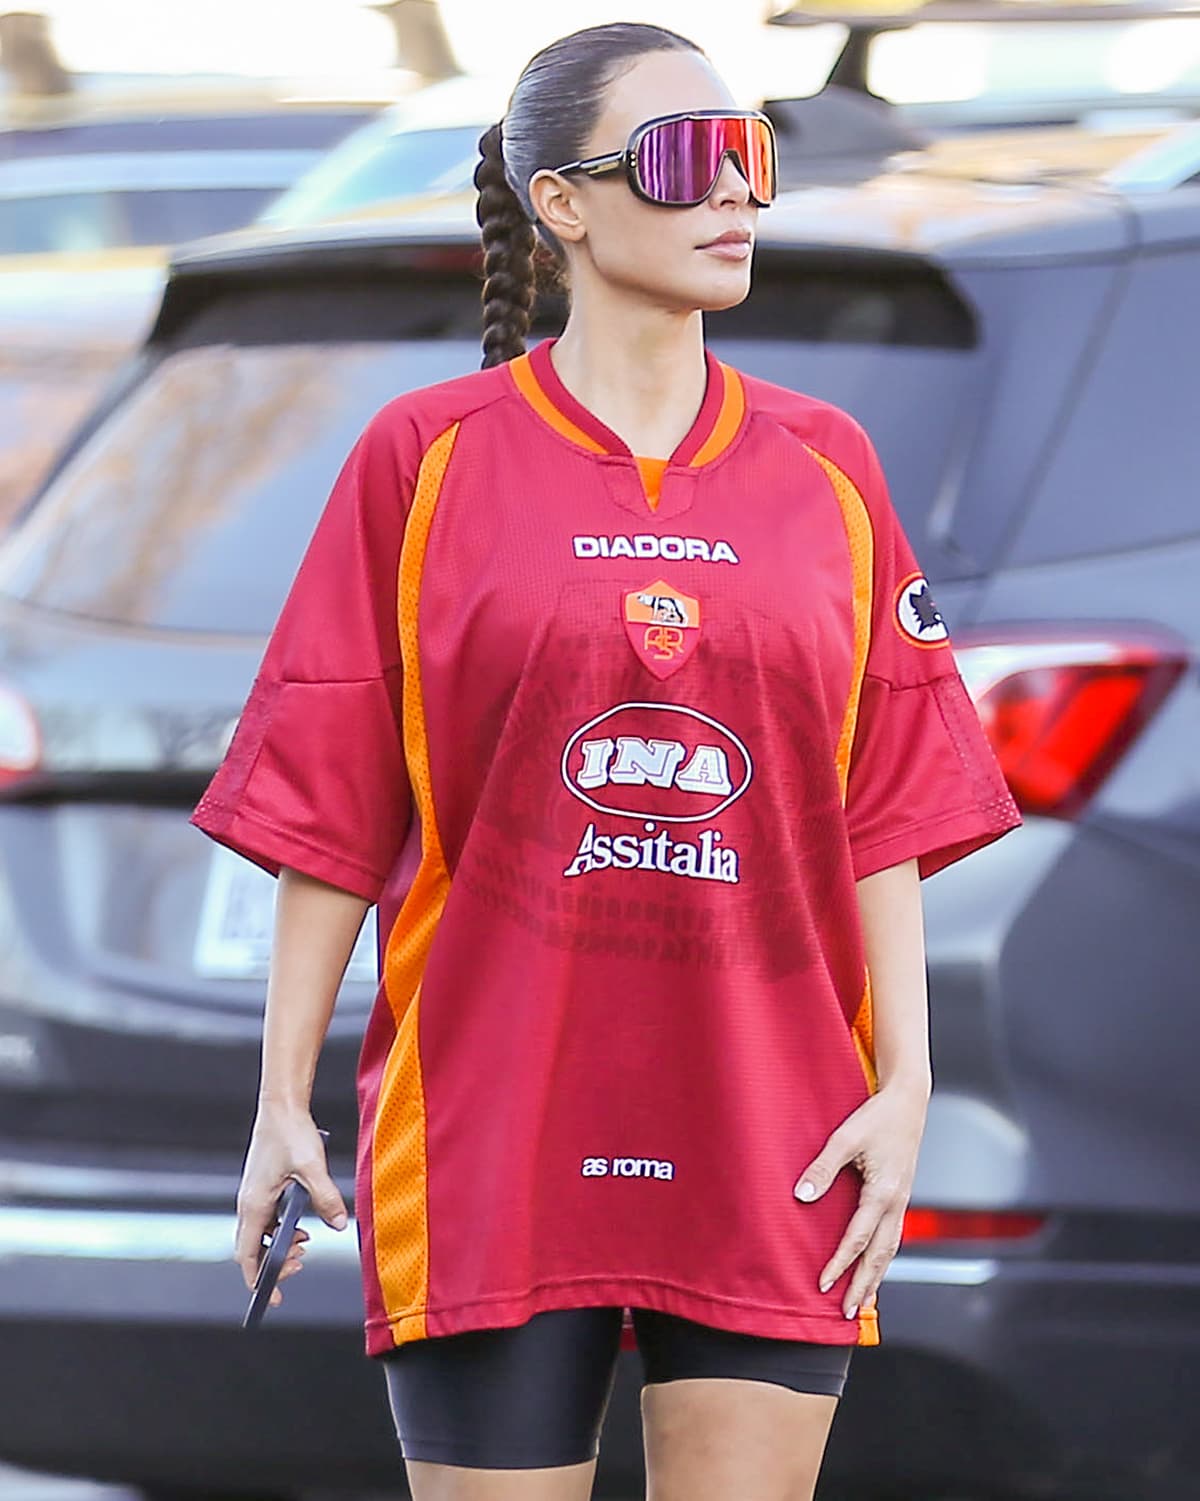 Kim Kardashian hides her eyes behind Carrera's Epica 0Uc/W3 sunglasses and wears her hair in a braided ponytail